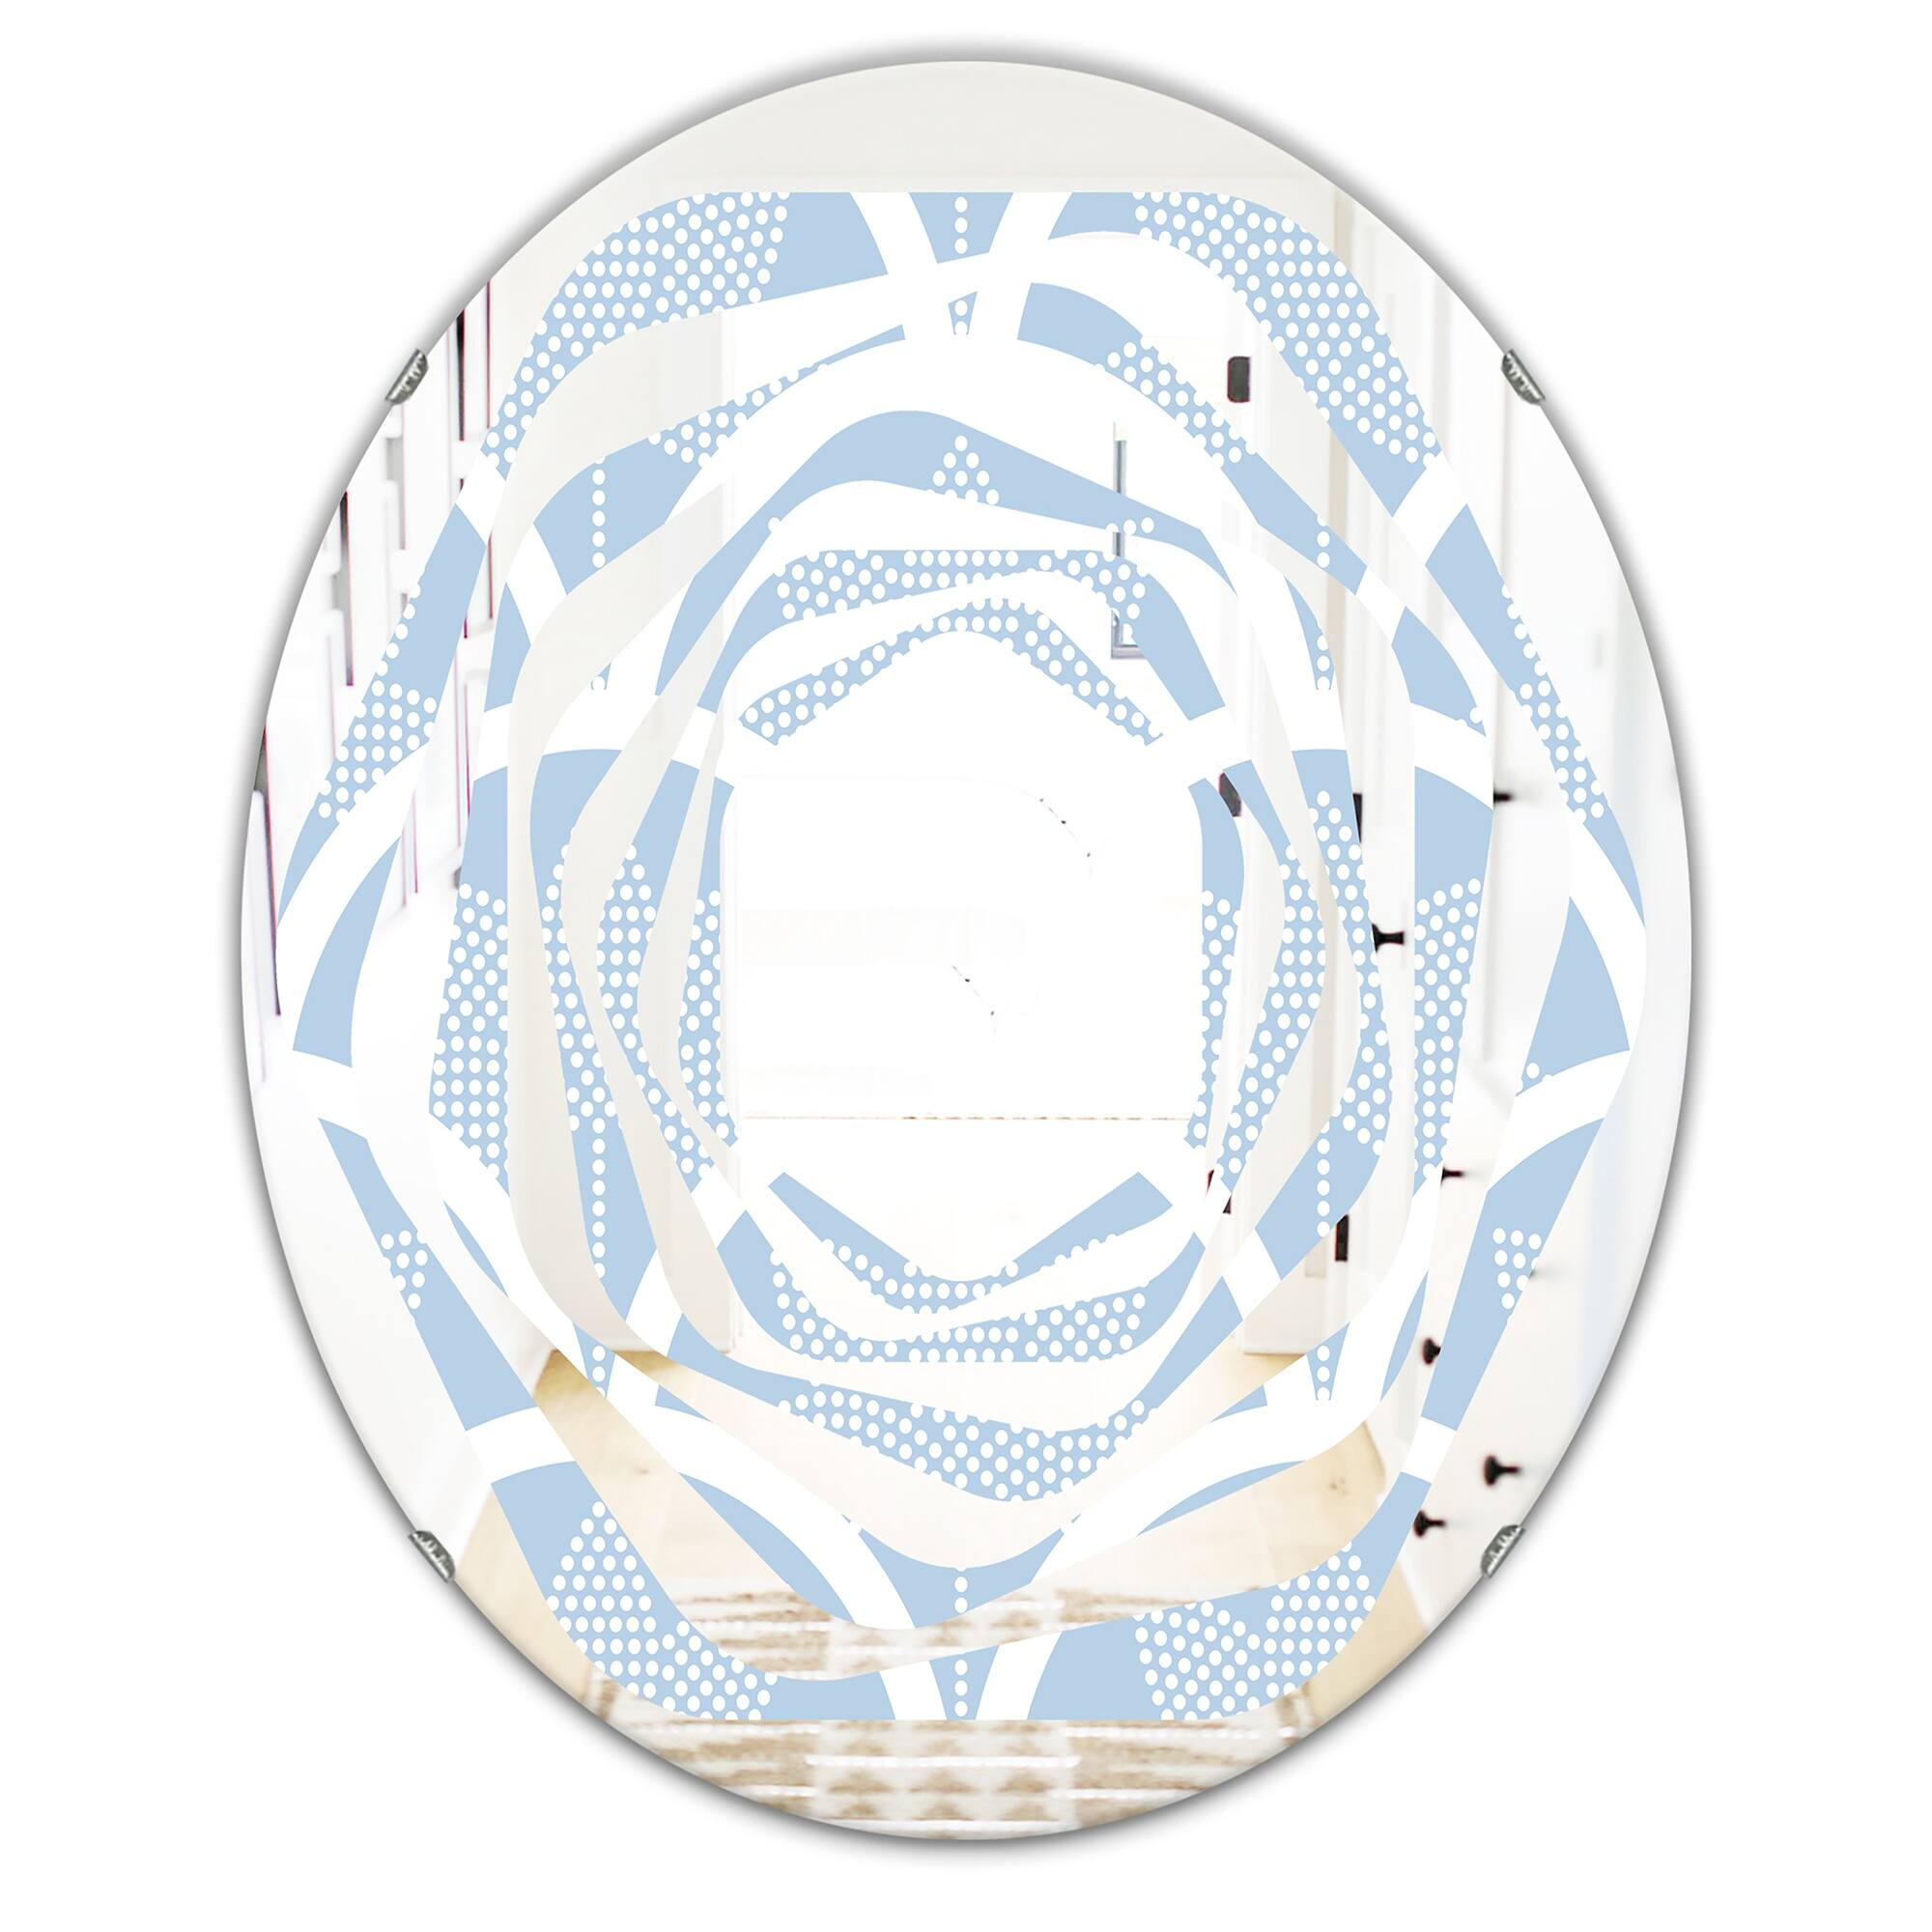 Designart 'Japanese style Half' Printed Modern Round or Oval Wall Mirror - Whirl